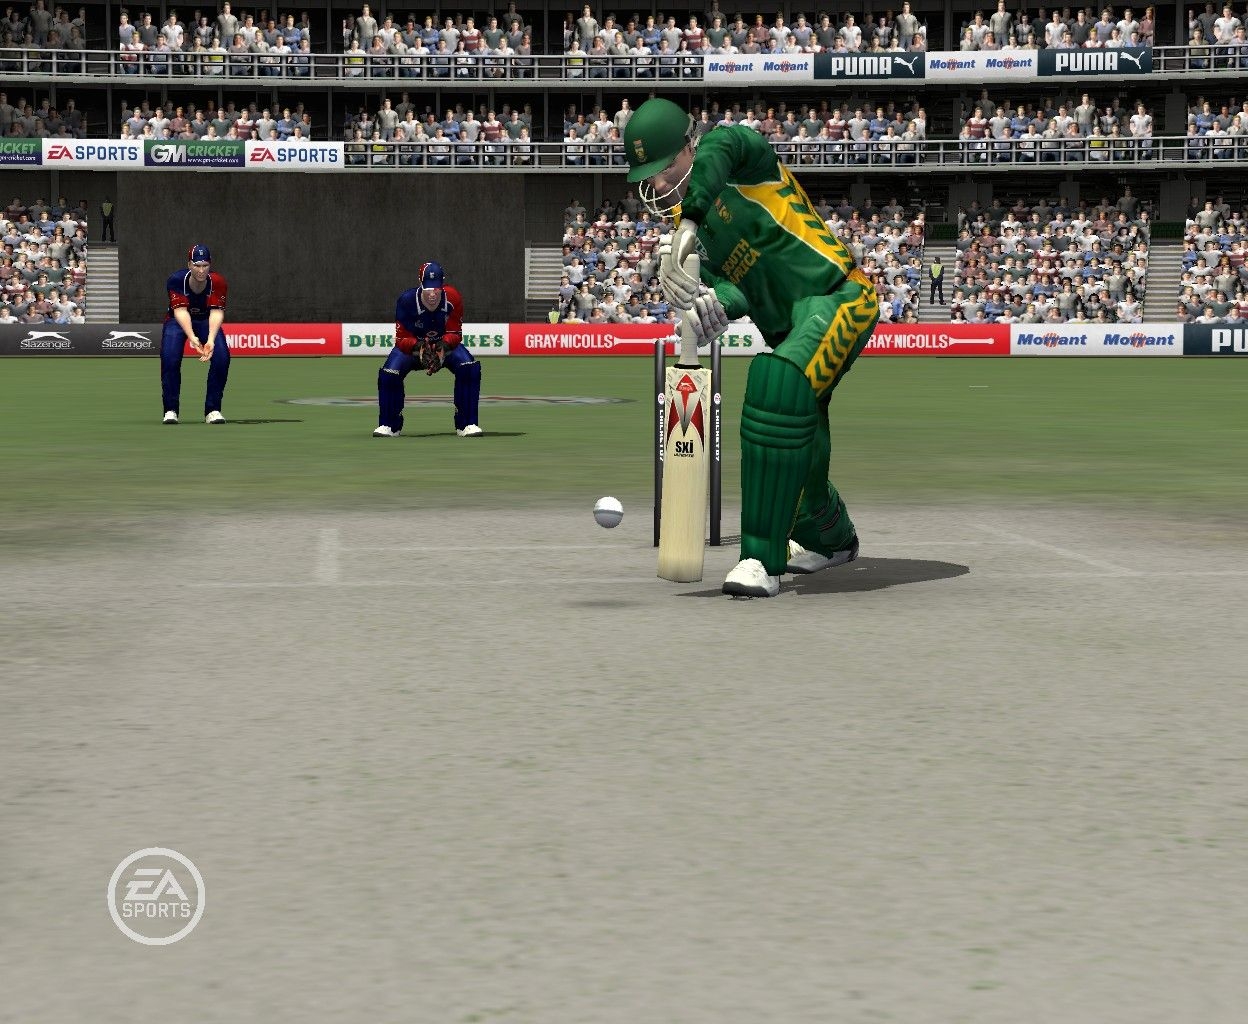 cricket games 2010 free download utorrent for pc